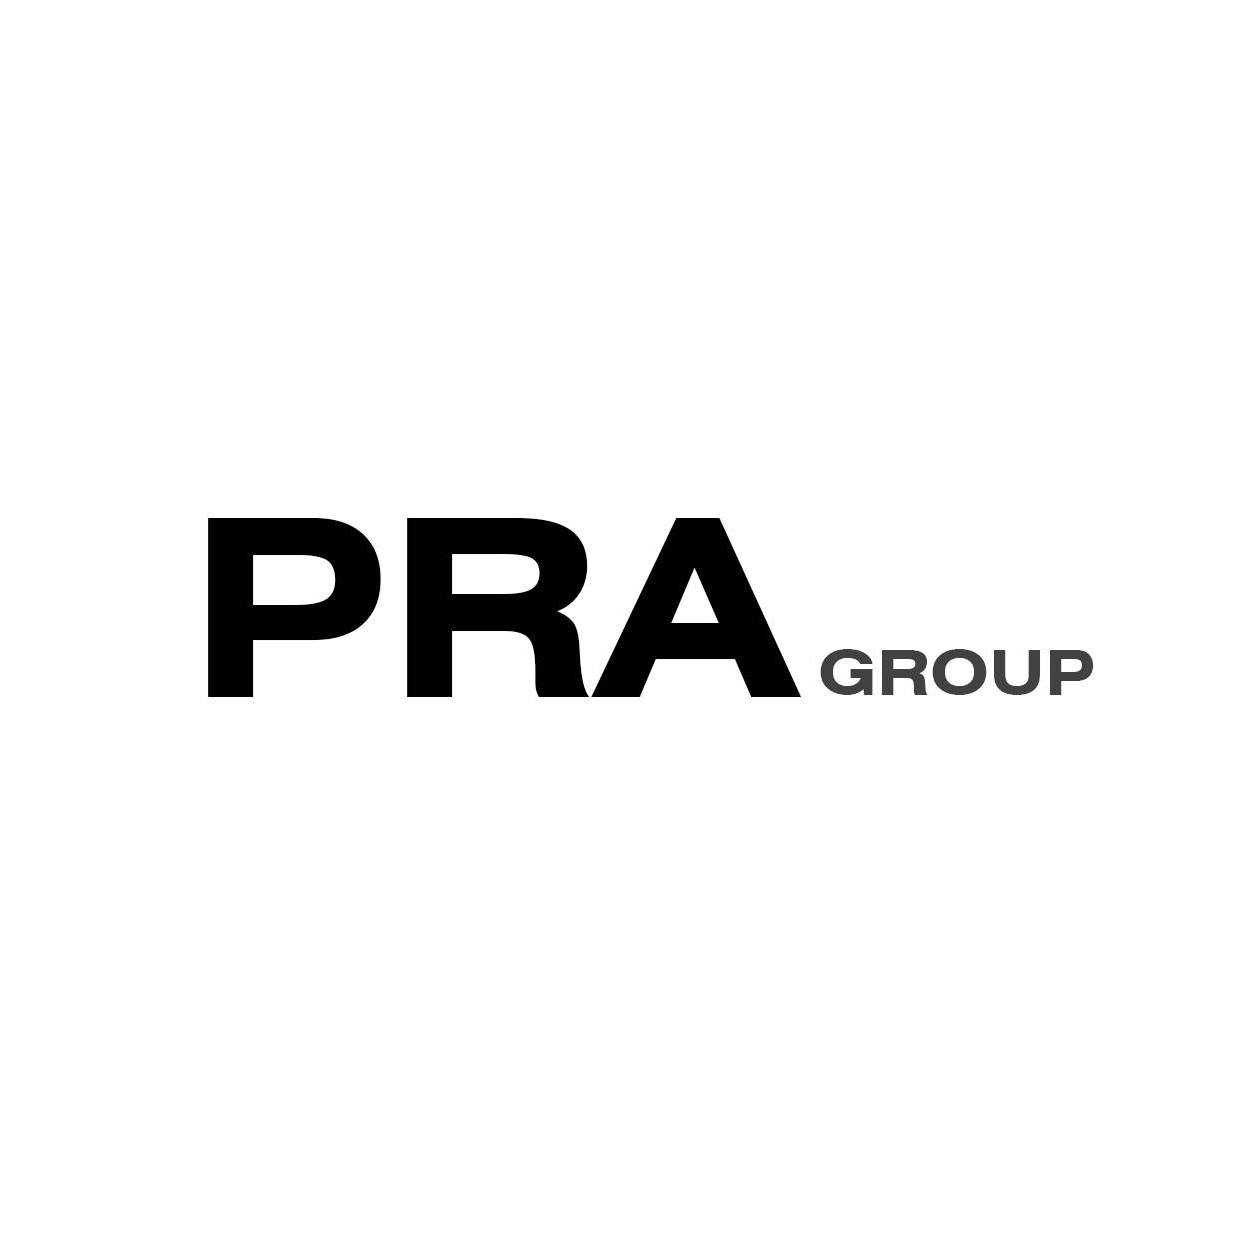 PRA GROUP|IT Services|Professional Services